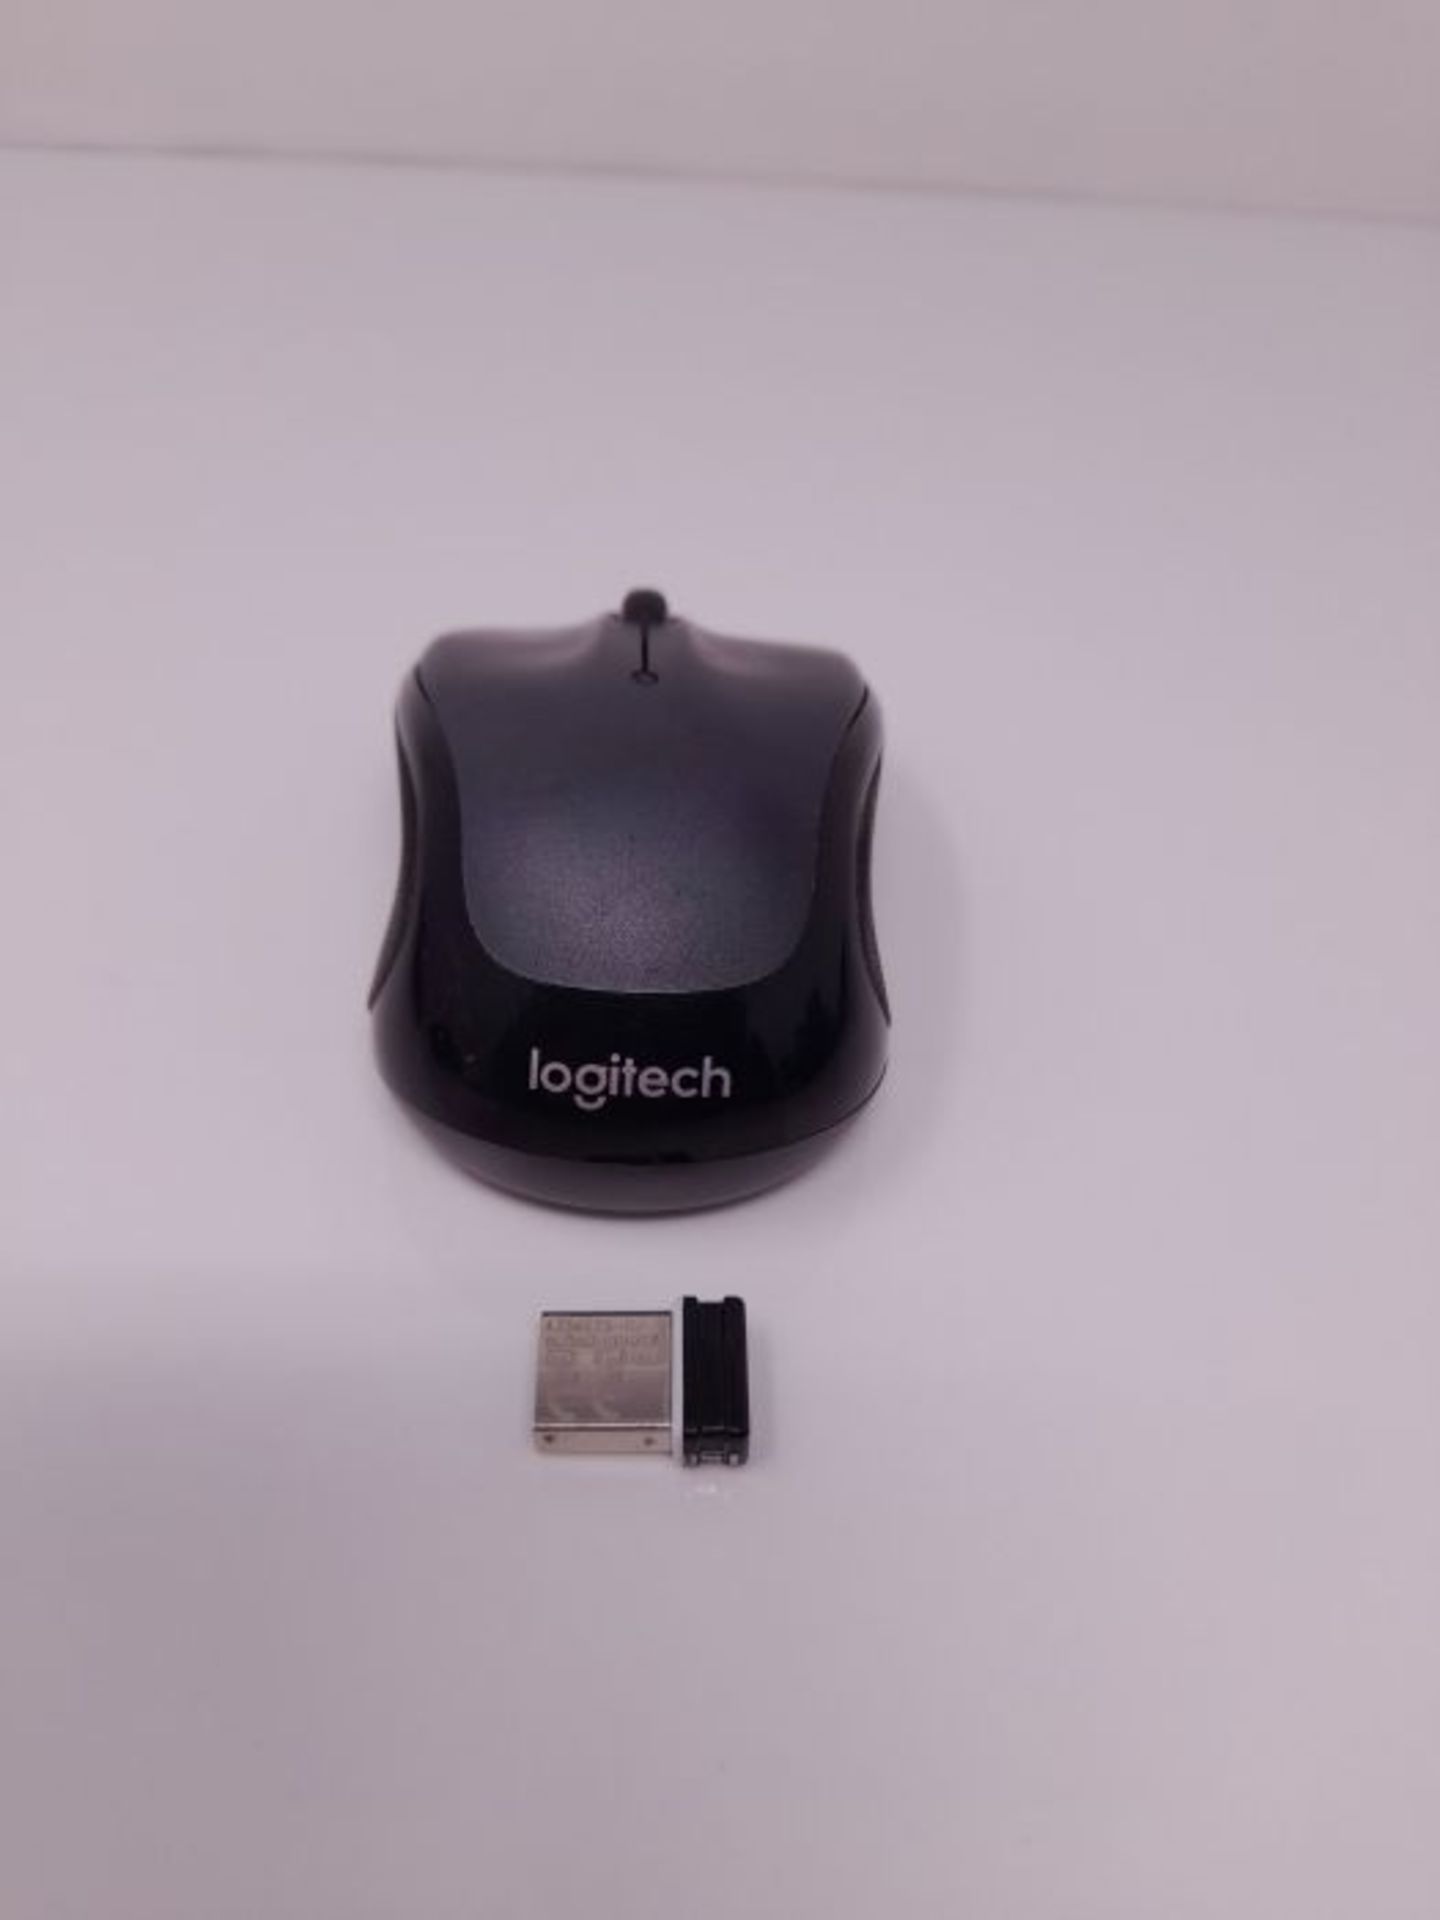 Logitech M325 Wireless Mouse, 2.4 GHz with USB Unifying Receiver, 1000 DPI Optical Tra - Image 3 of 3